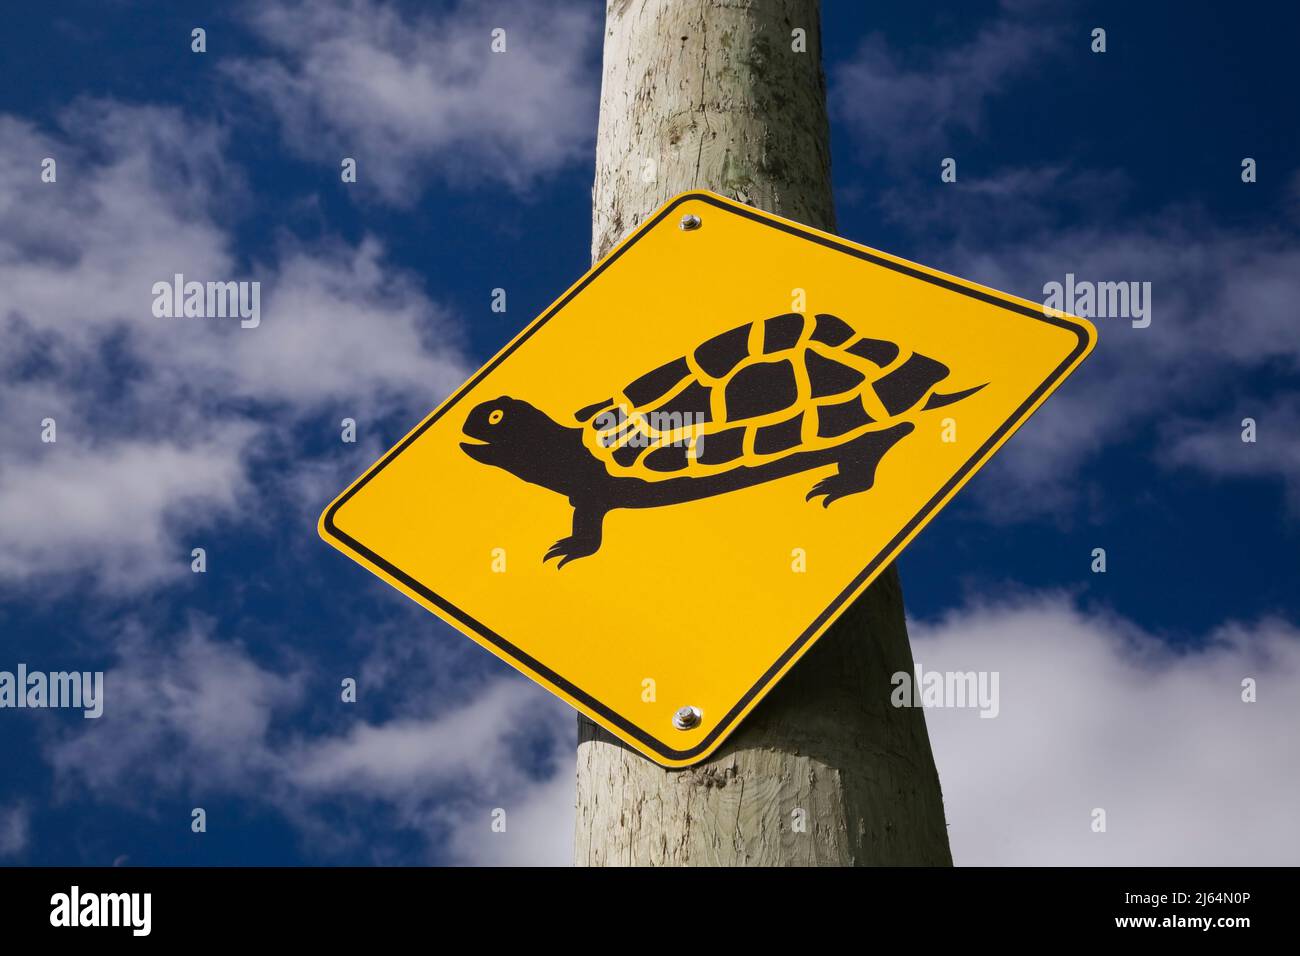 Yellow and black turtle crossing pictogram sign on a telephone pole. Stock Photo